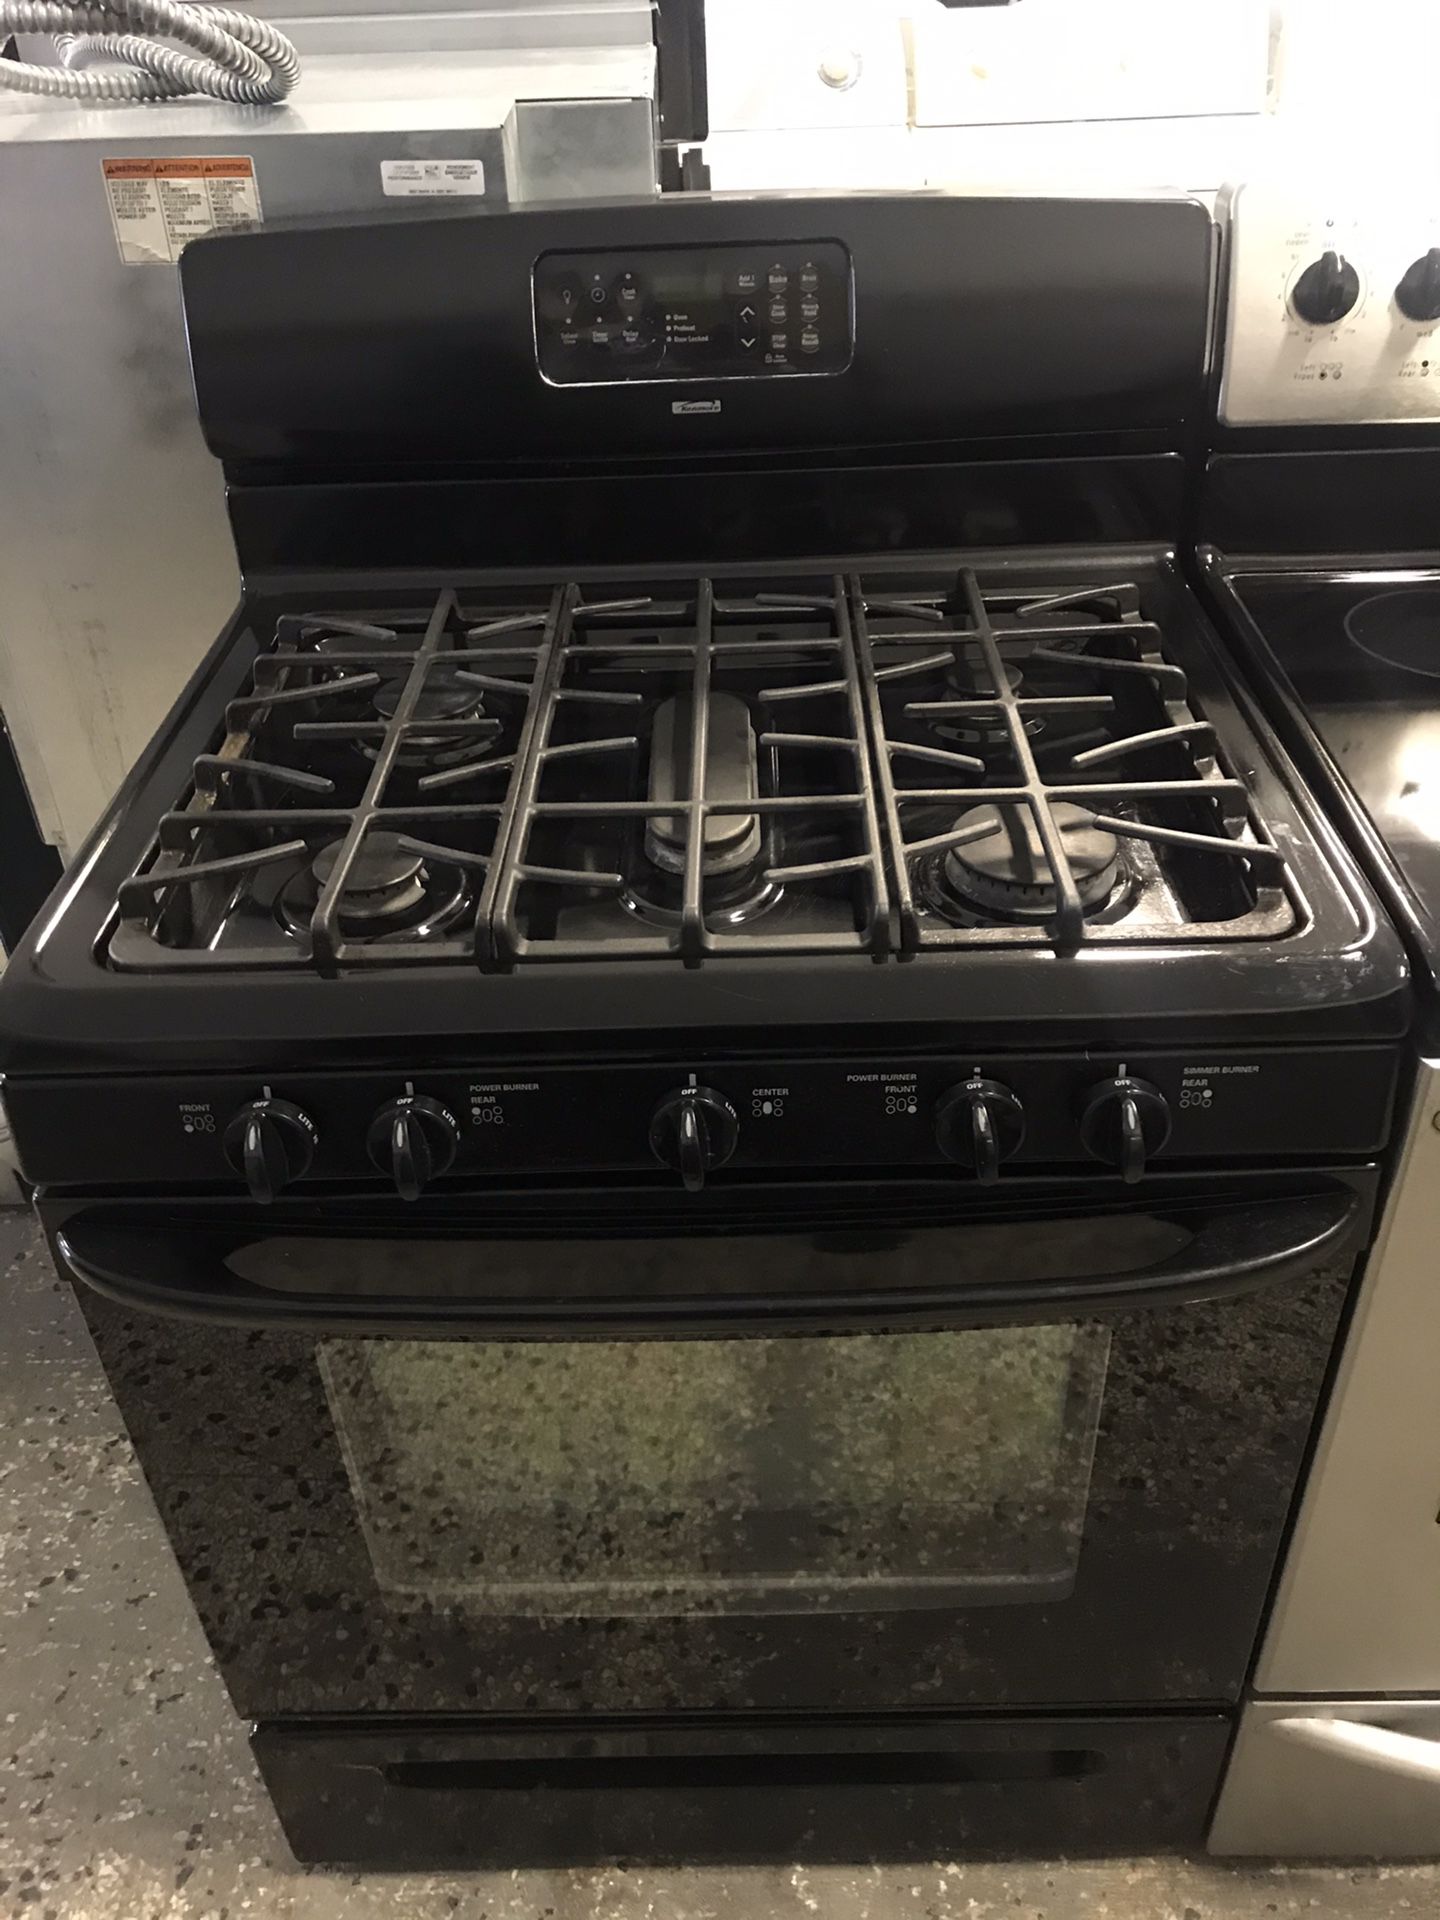 Kenmore brand refurbished 5 burner gas stove works great with warranty.